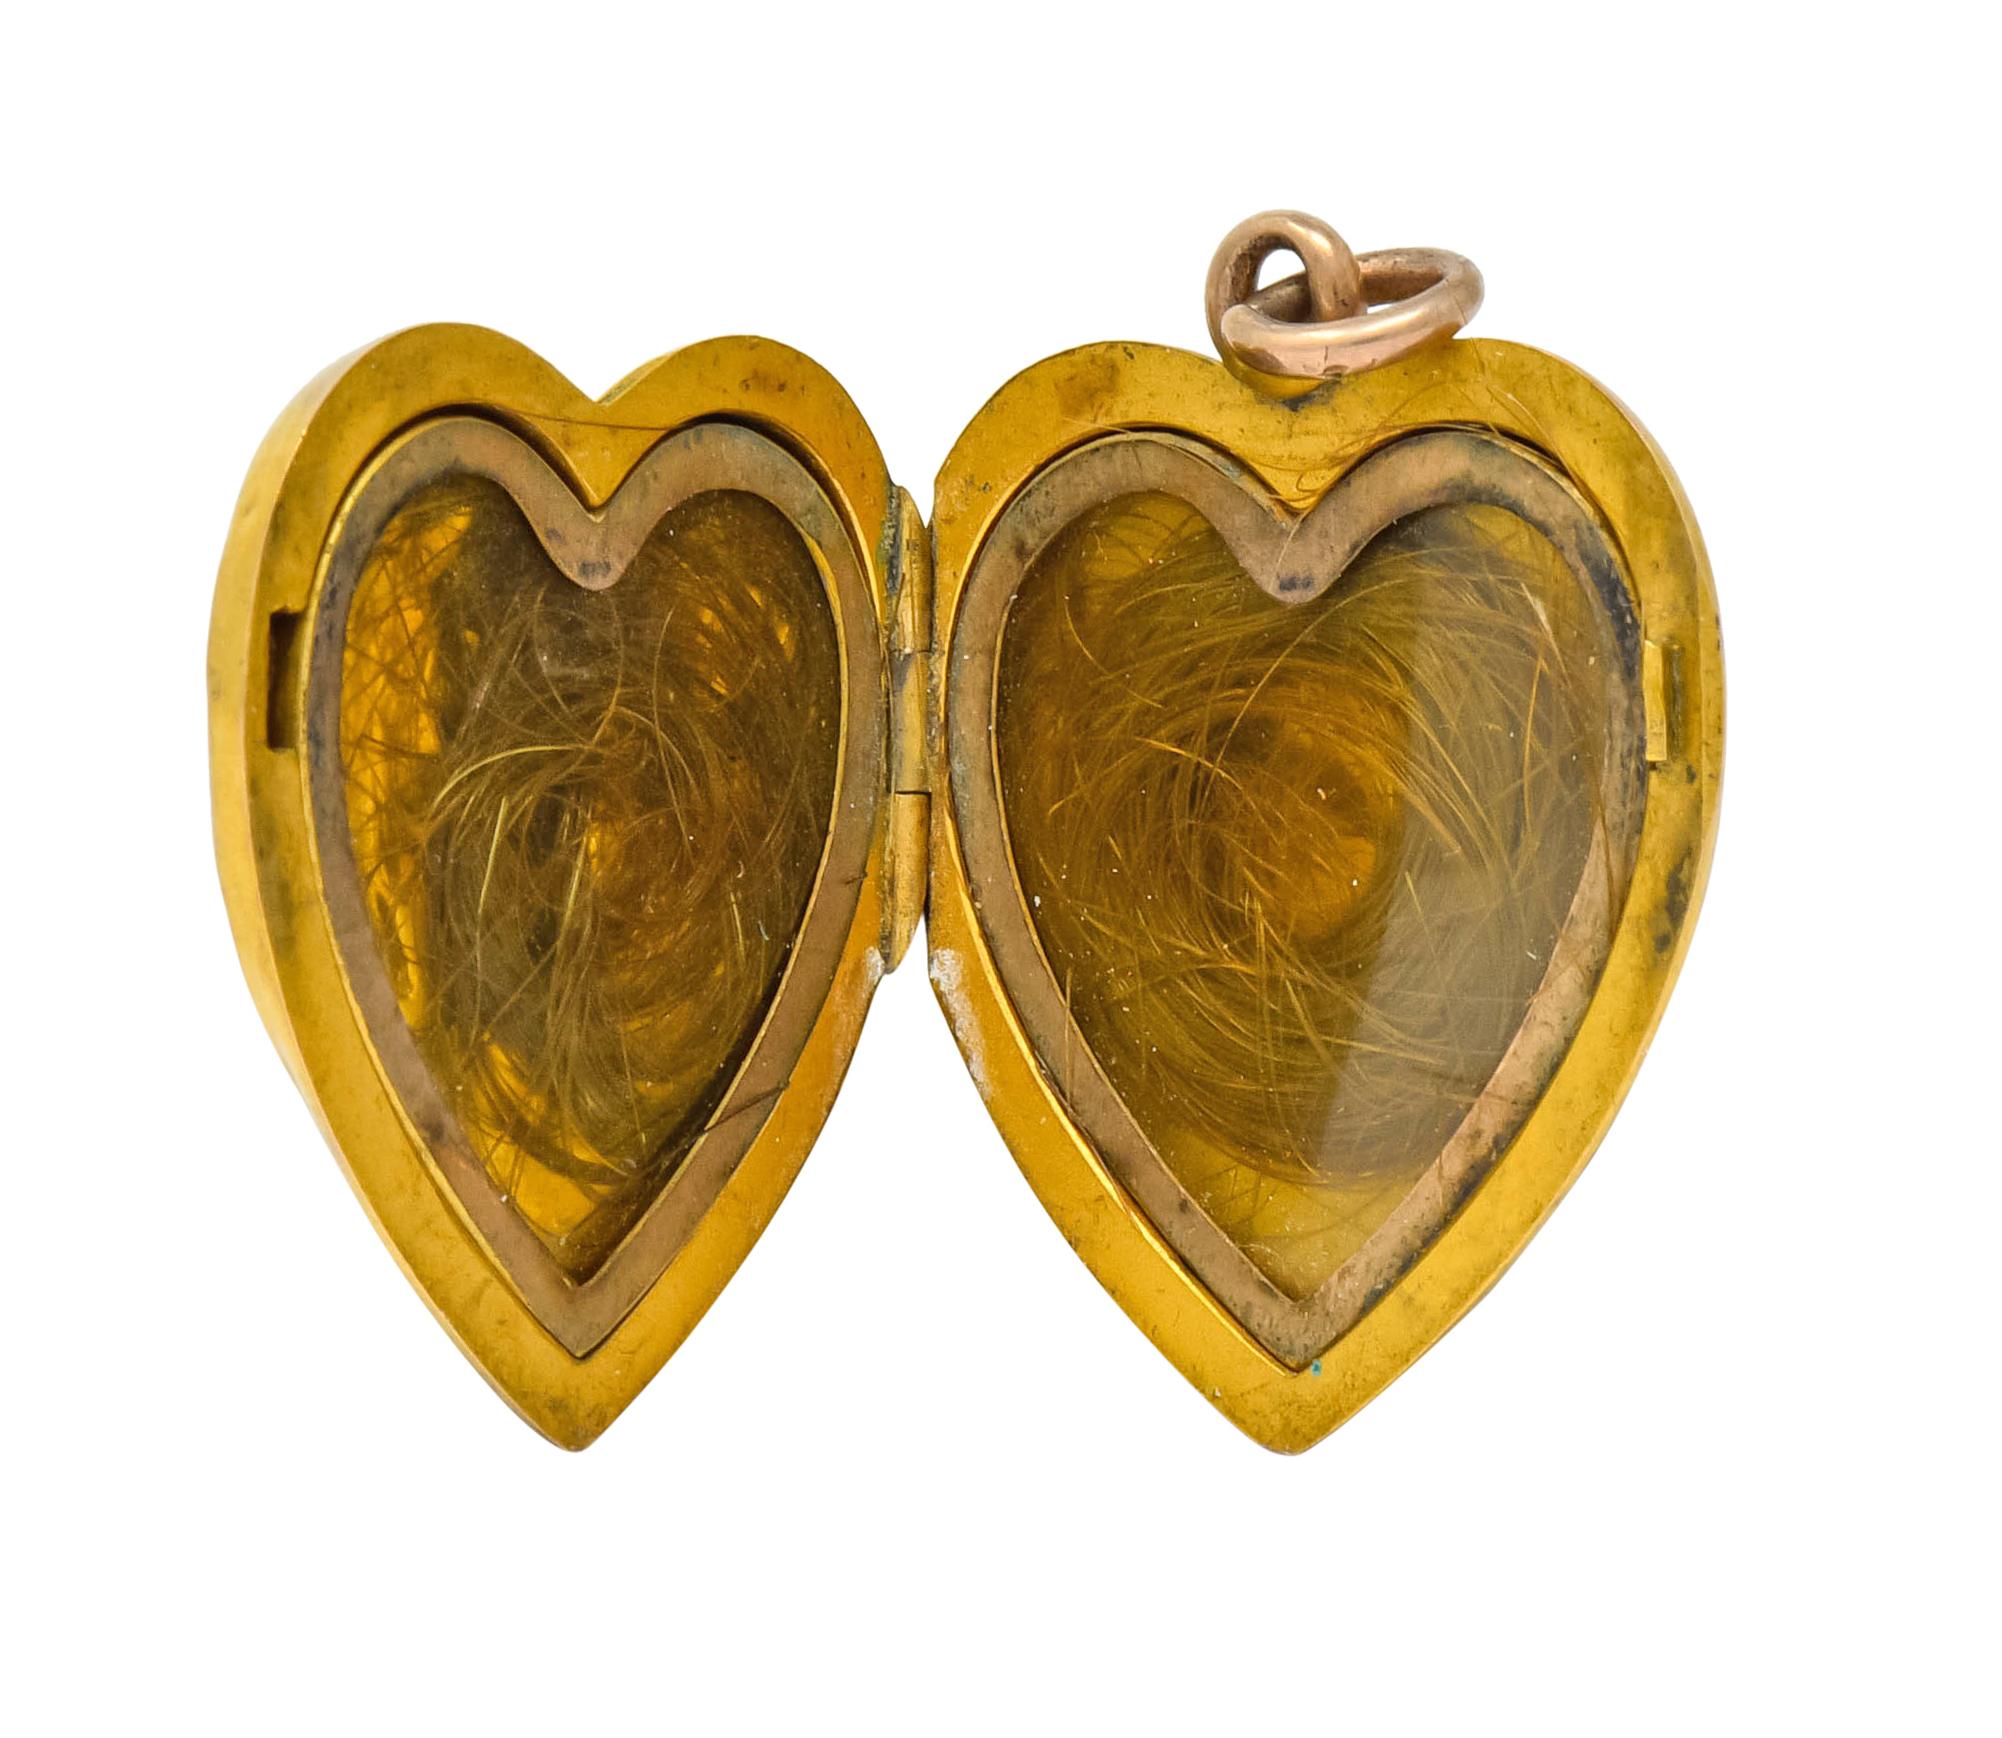 Heart shaped locket depicting a raised angelic face with corkscrew curls flanked by highly rendered angel wings

Opens on a hinge to reveal two covered recesses, each containing circular locks of hair

Completed by jump ring bale and matte gold